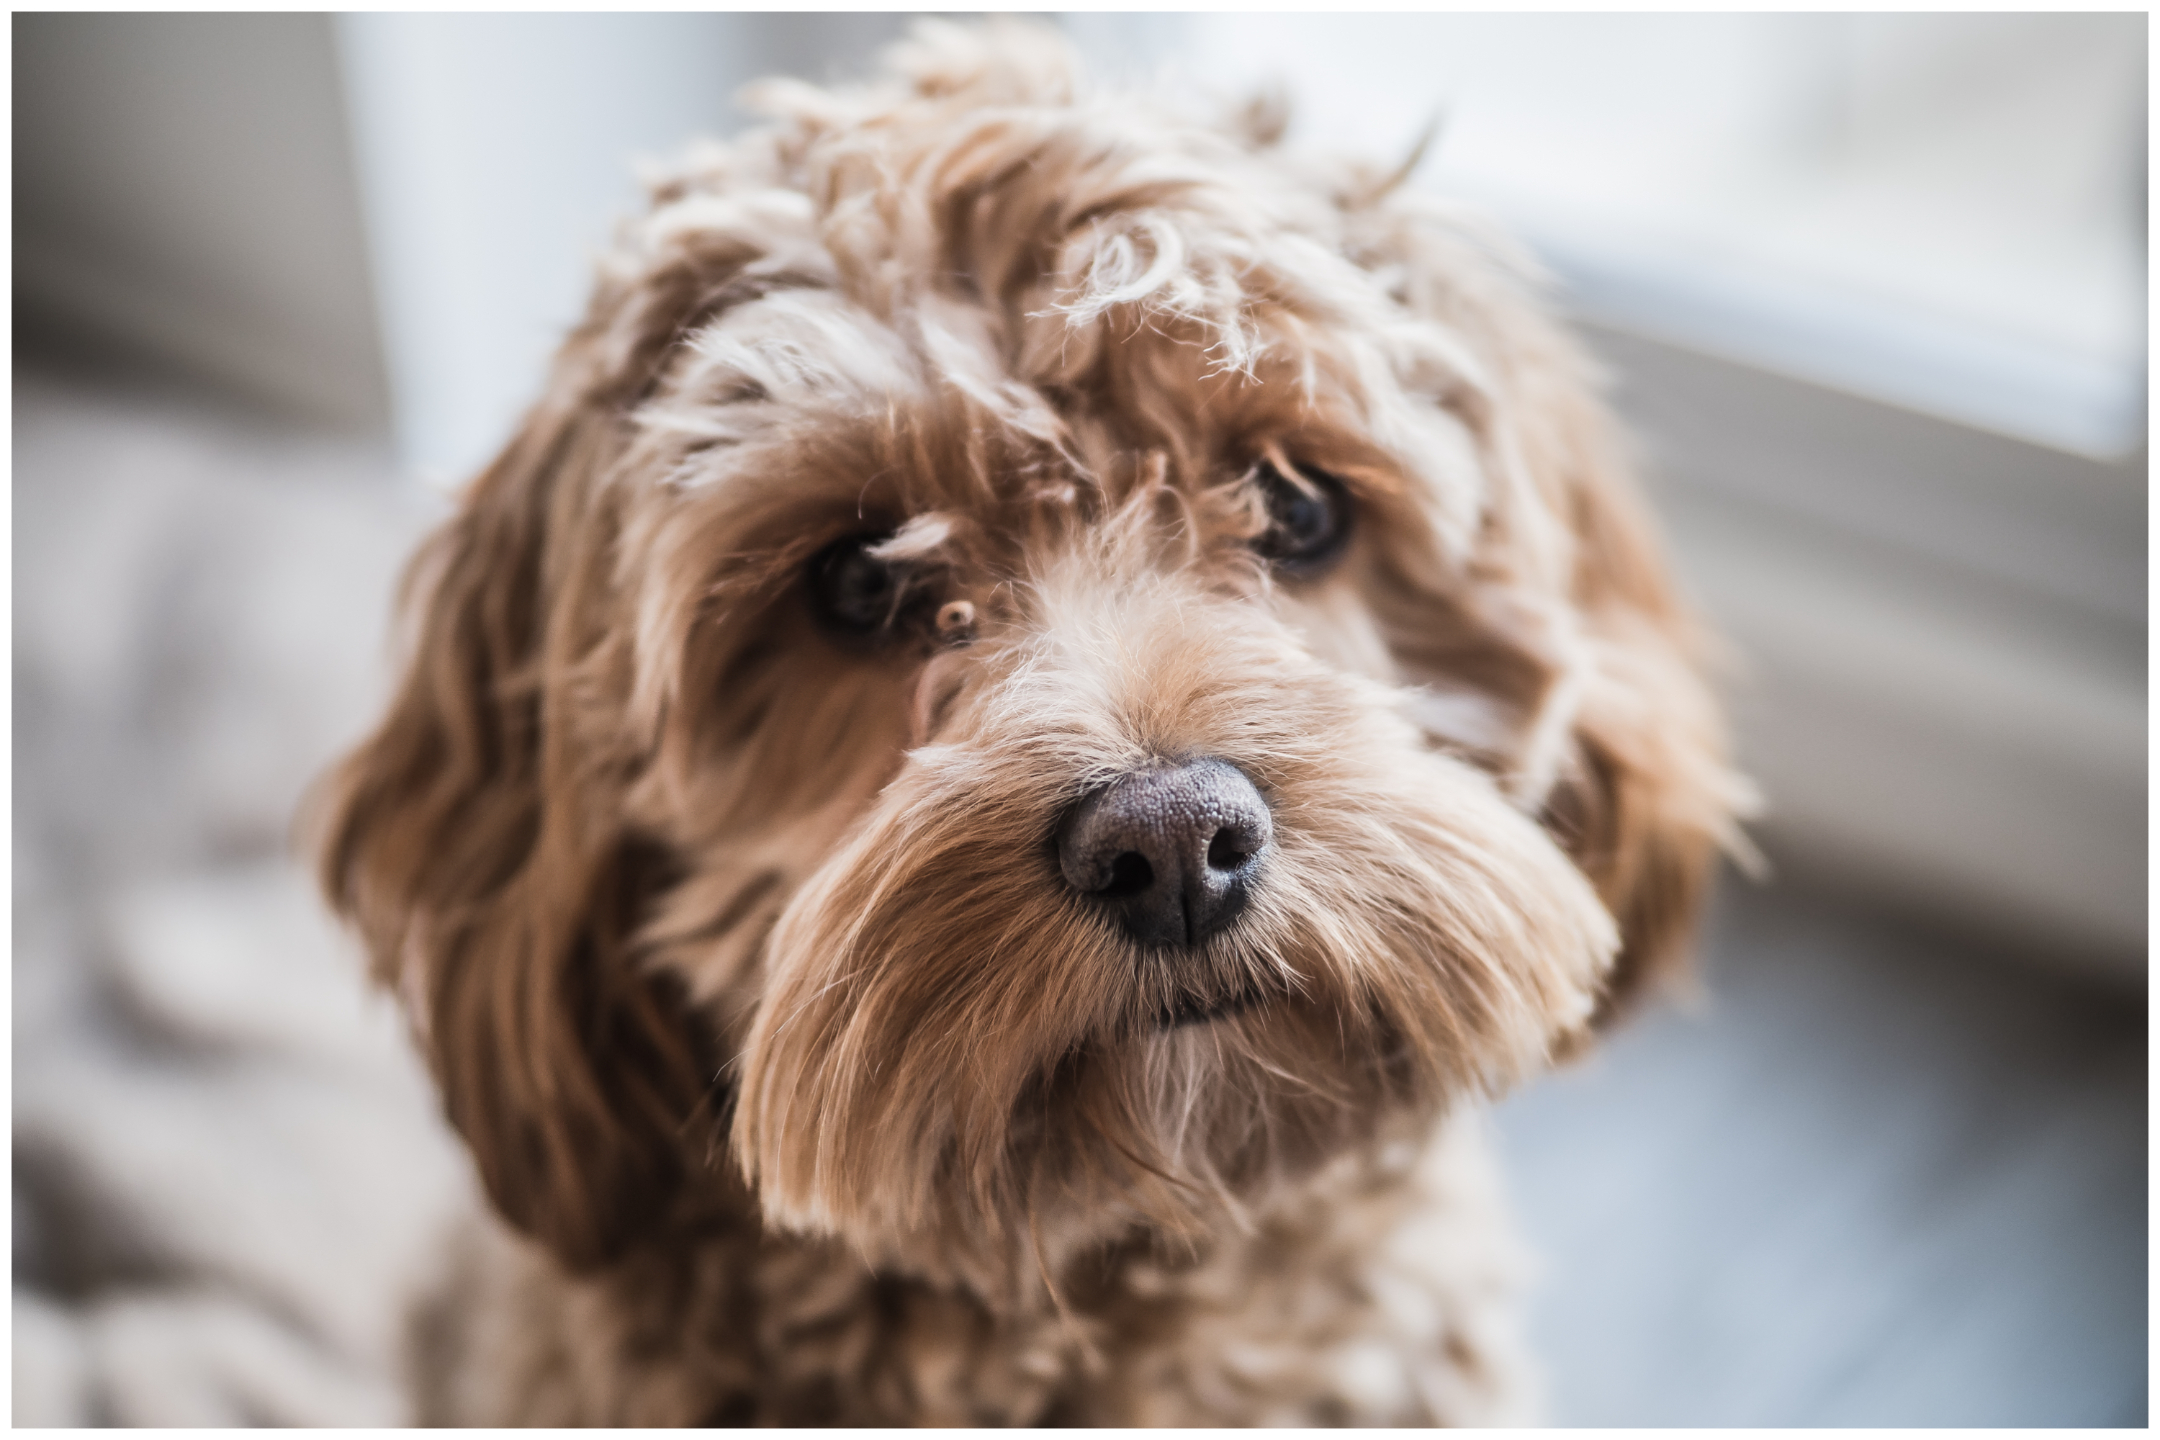 "Naughty boy"—Cockapoo has guilty expression after being caught red-handed - breaking news today - World Updates - Public News Time